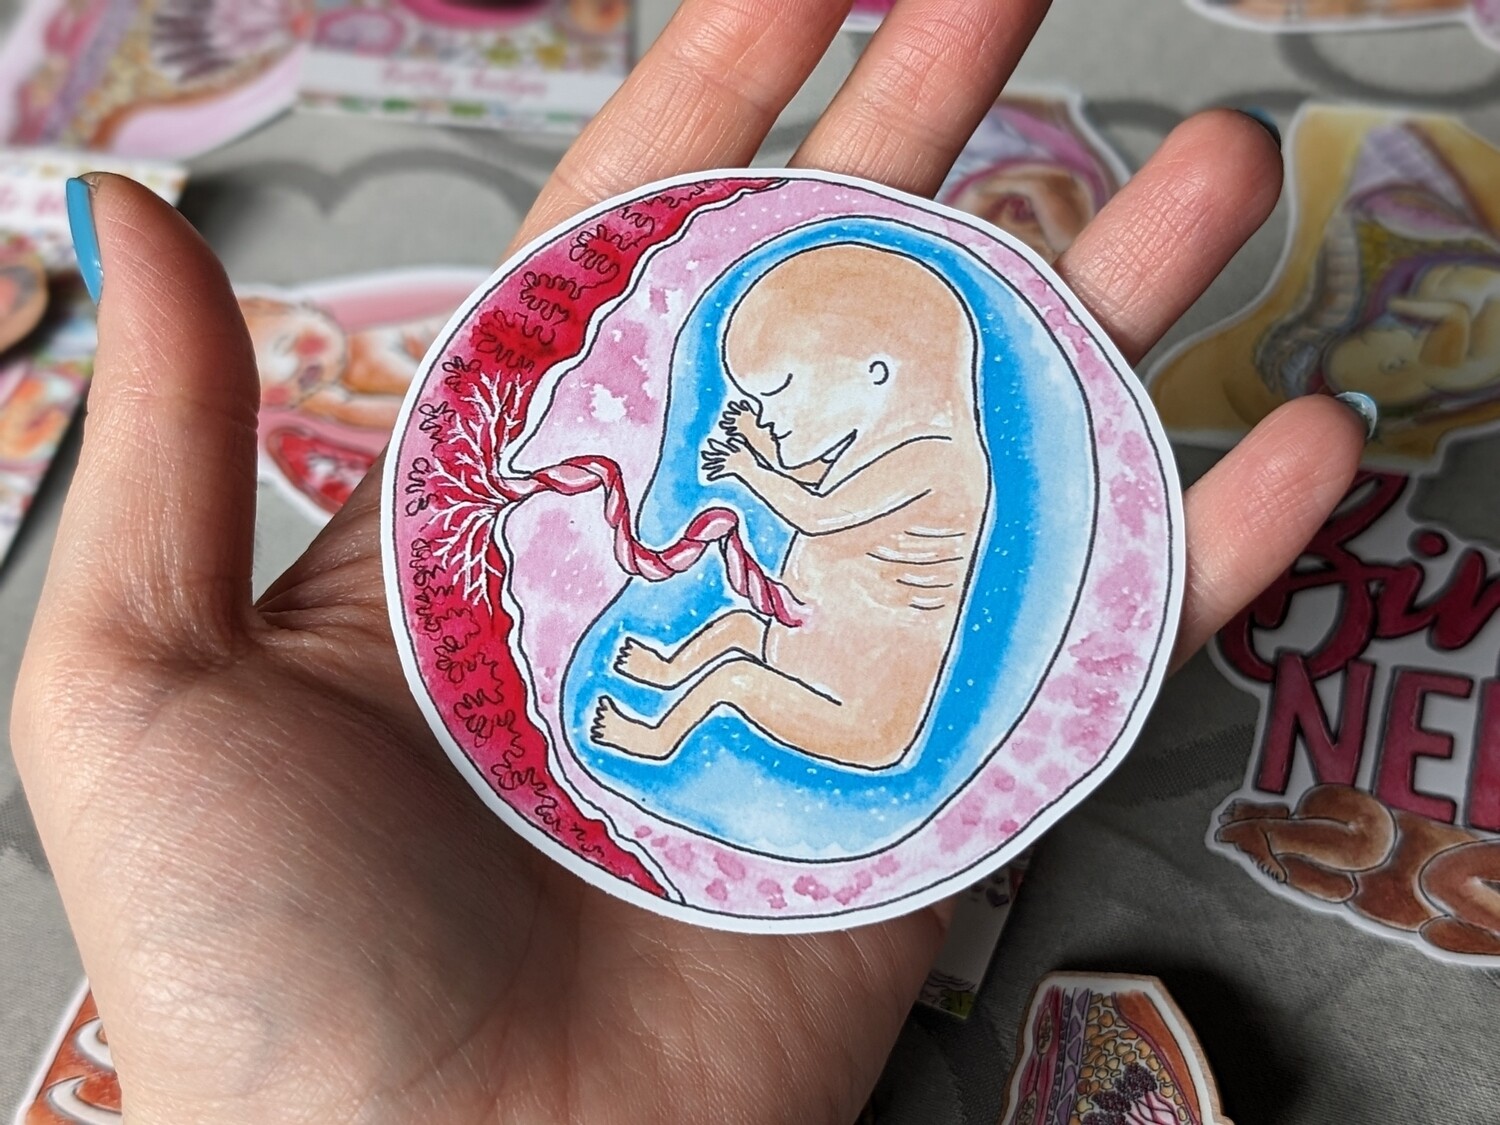 Baby in the Womb 8cm Midwife Sticker